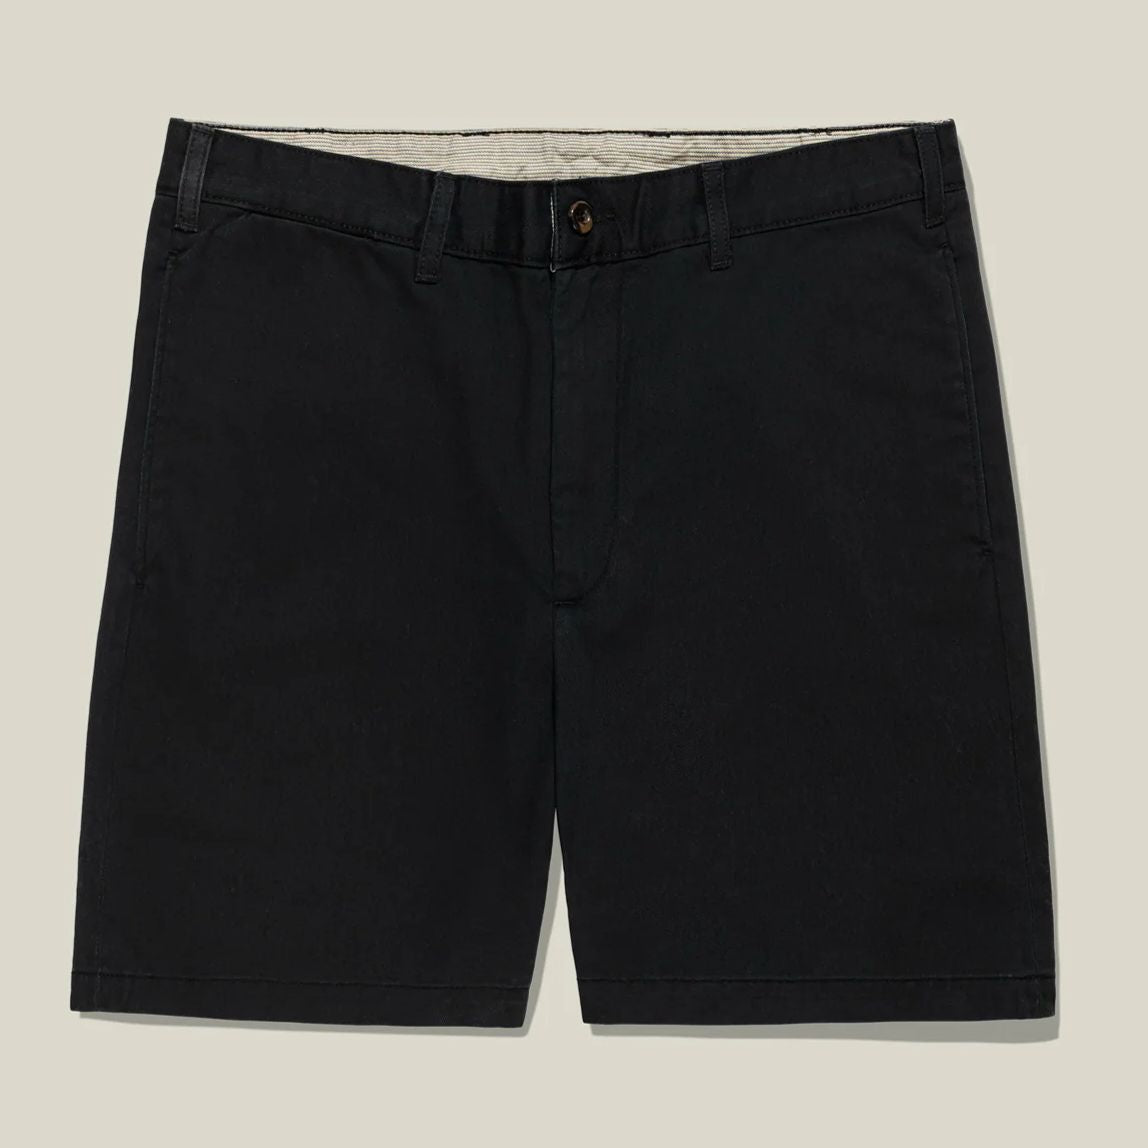 M2 Classic Fit Broken-In Chamois Twill Shorts in Midnight by Bills Khakis